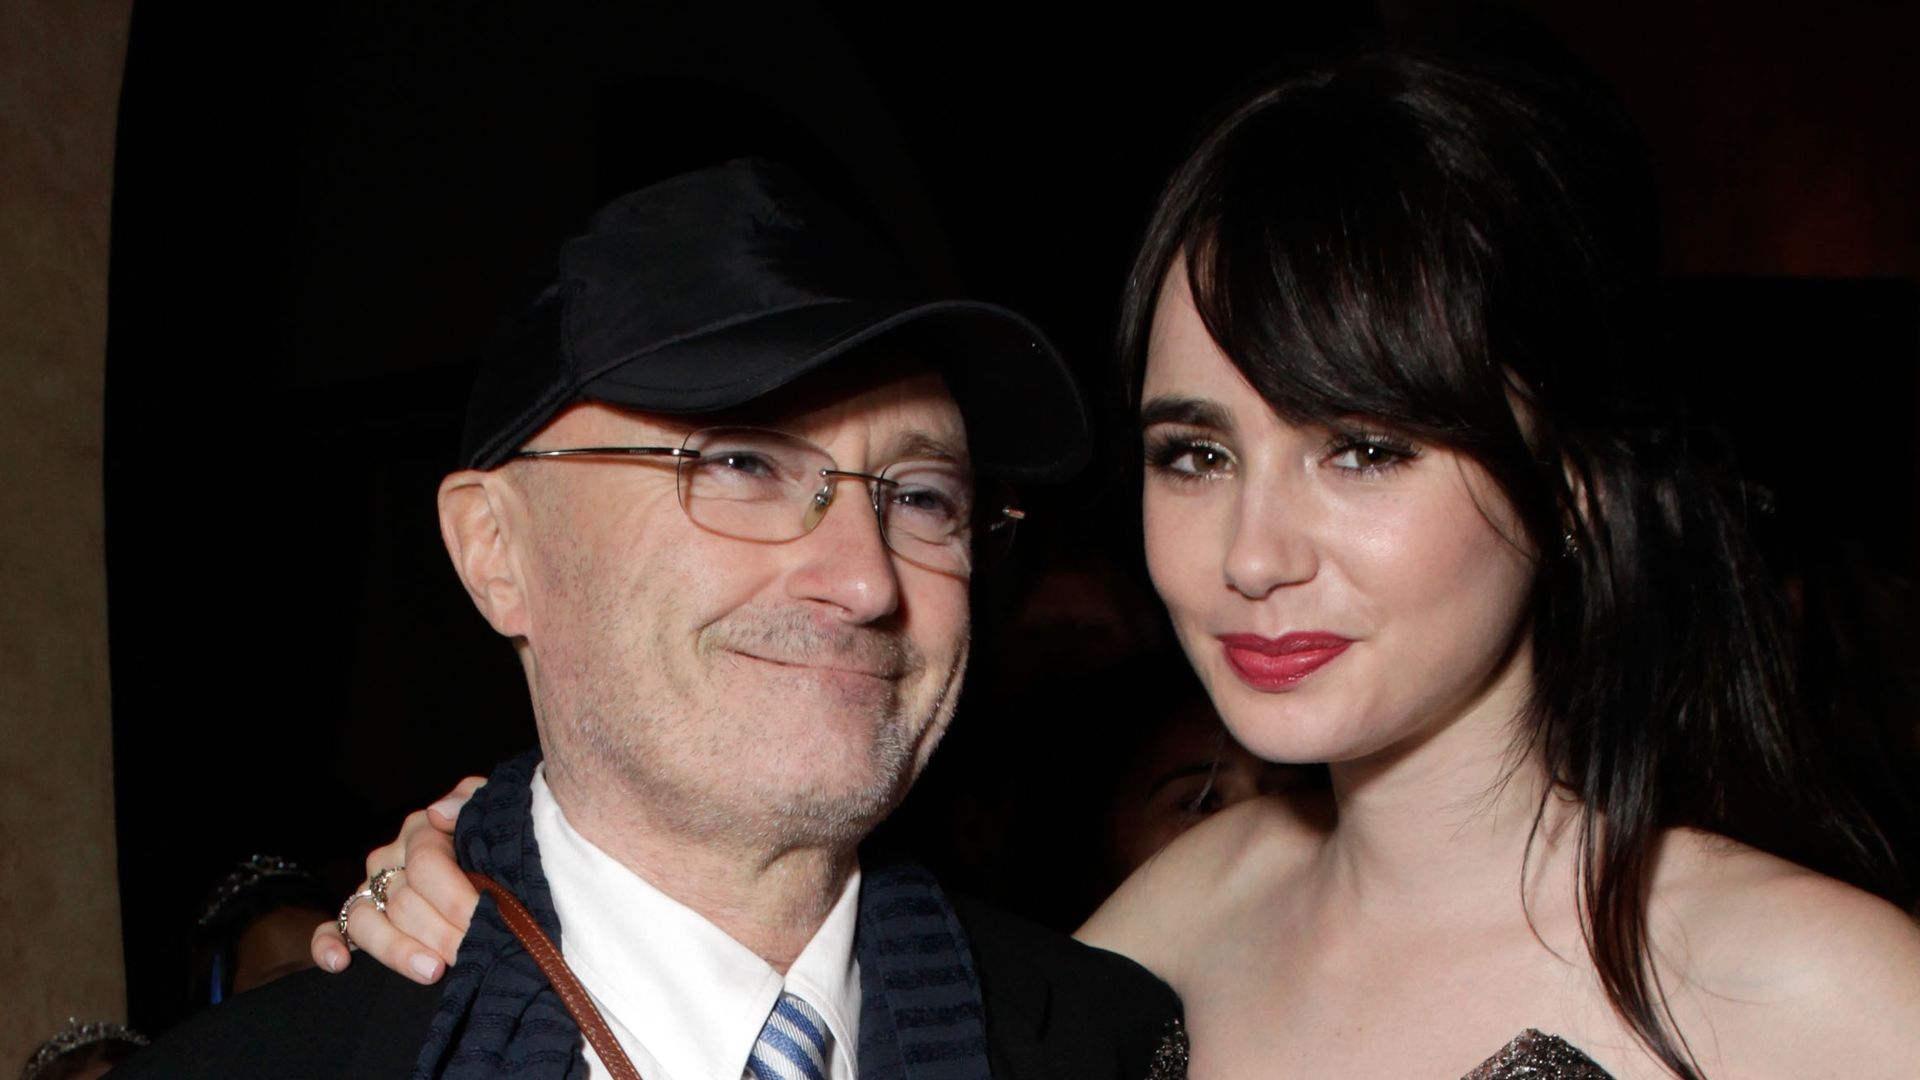 Musician Phil Collins and Actress Lily Collins attend the after party for Relativity Media's "Mirror Mirror" Los Angeles premiere at the Roosevelt Hotel on March 17, 2012 in Hollywood, California.